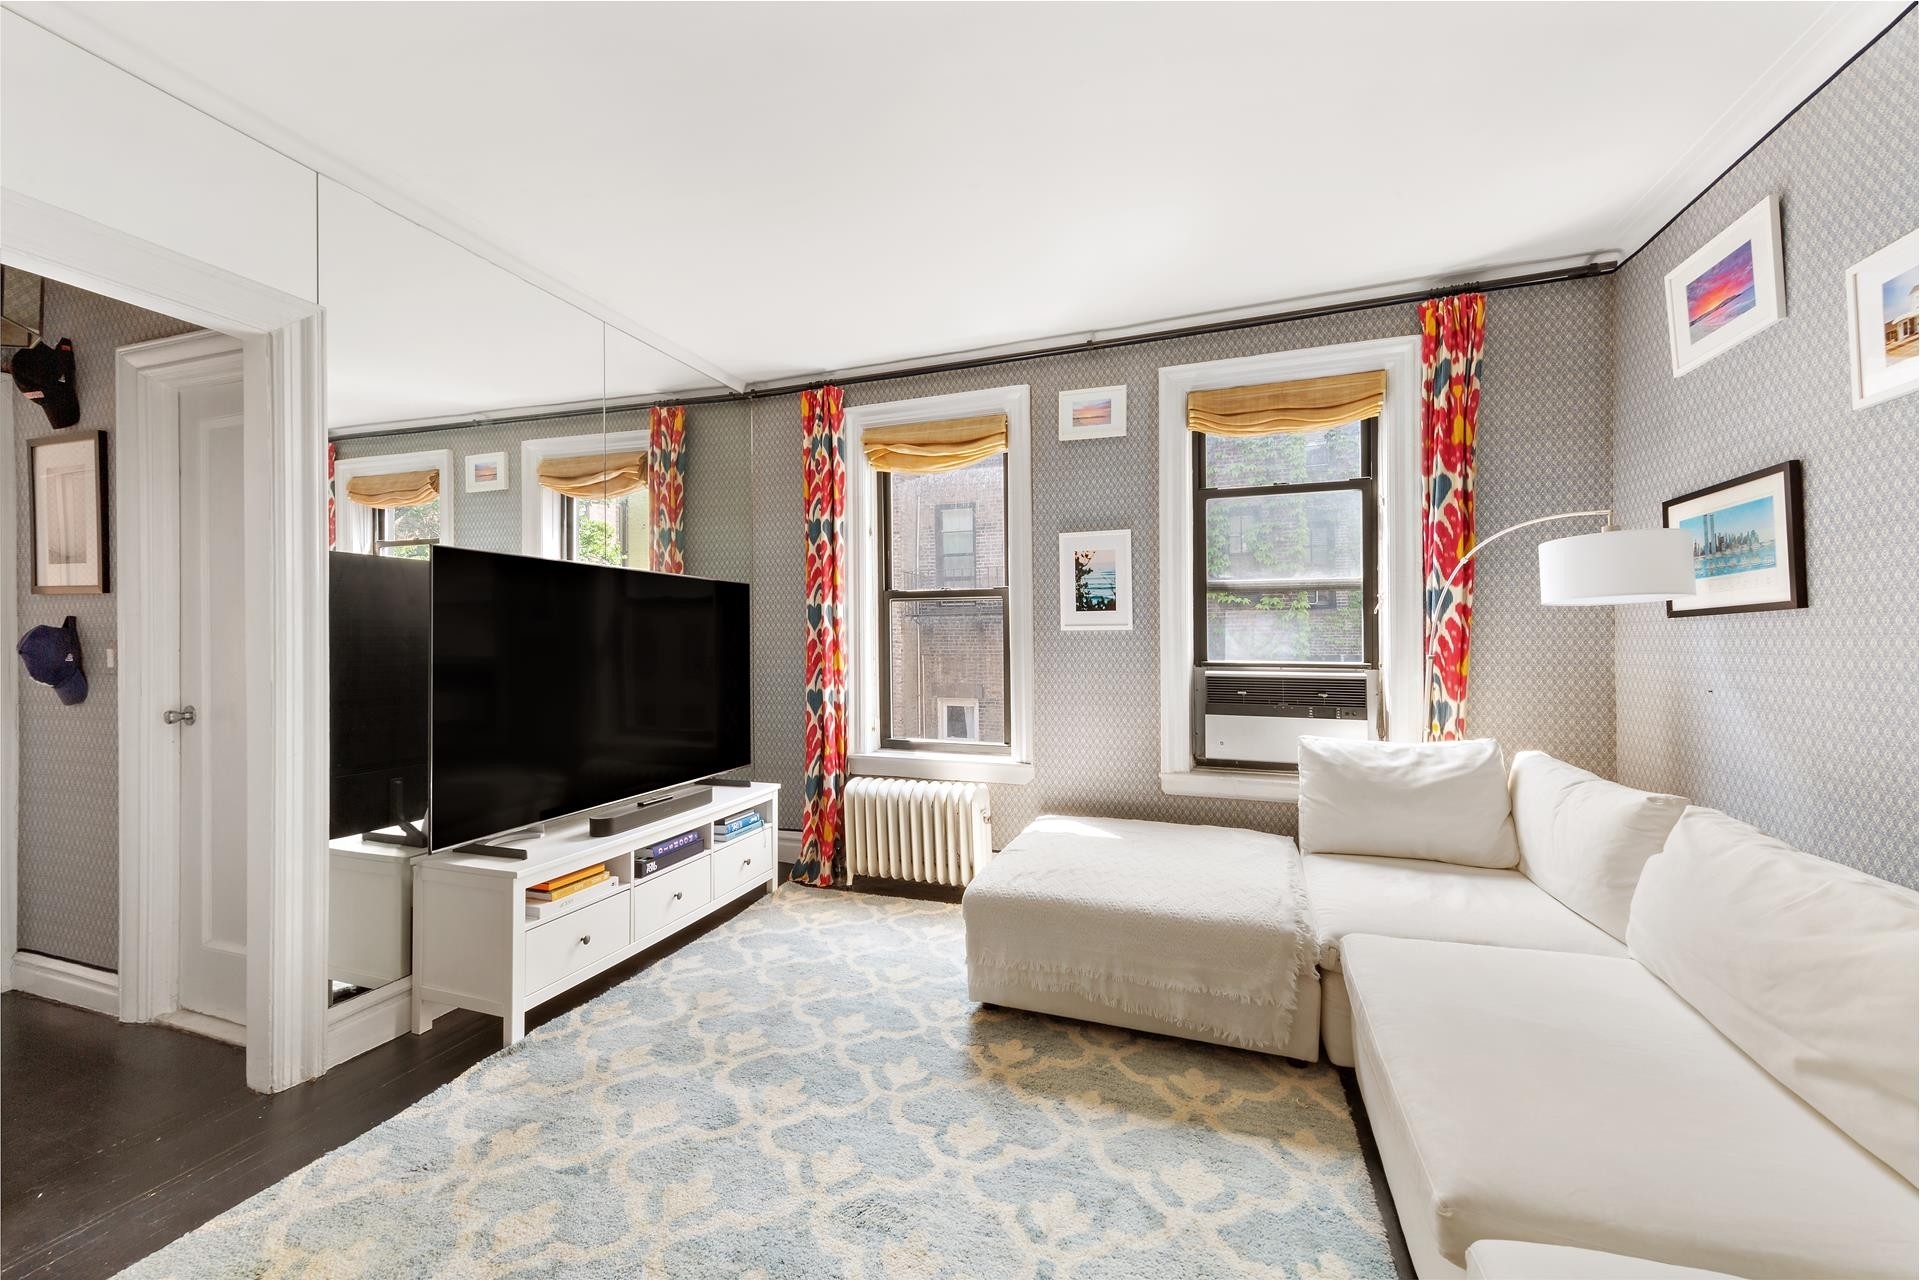 Co-op Properties for Sale at 270 W 11TH ST, 4G West Village, New York, NY 10014